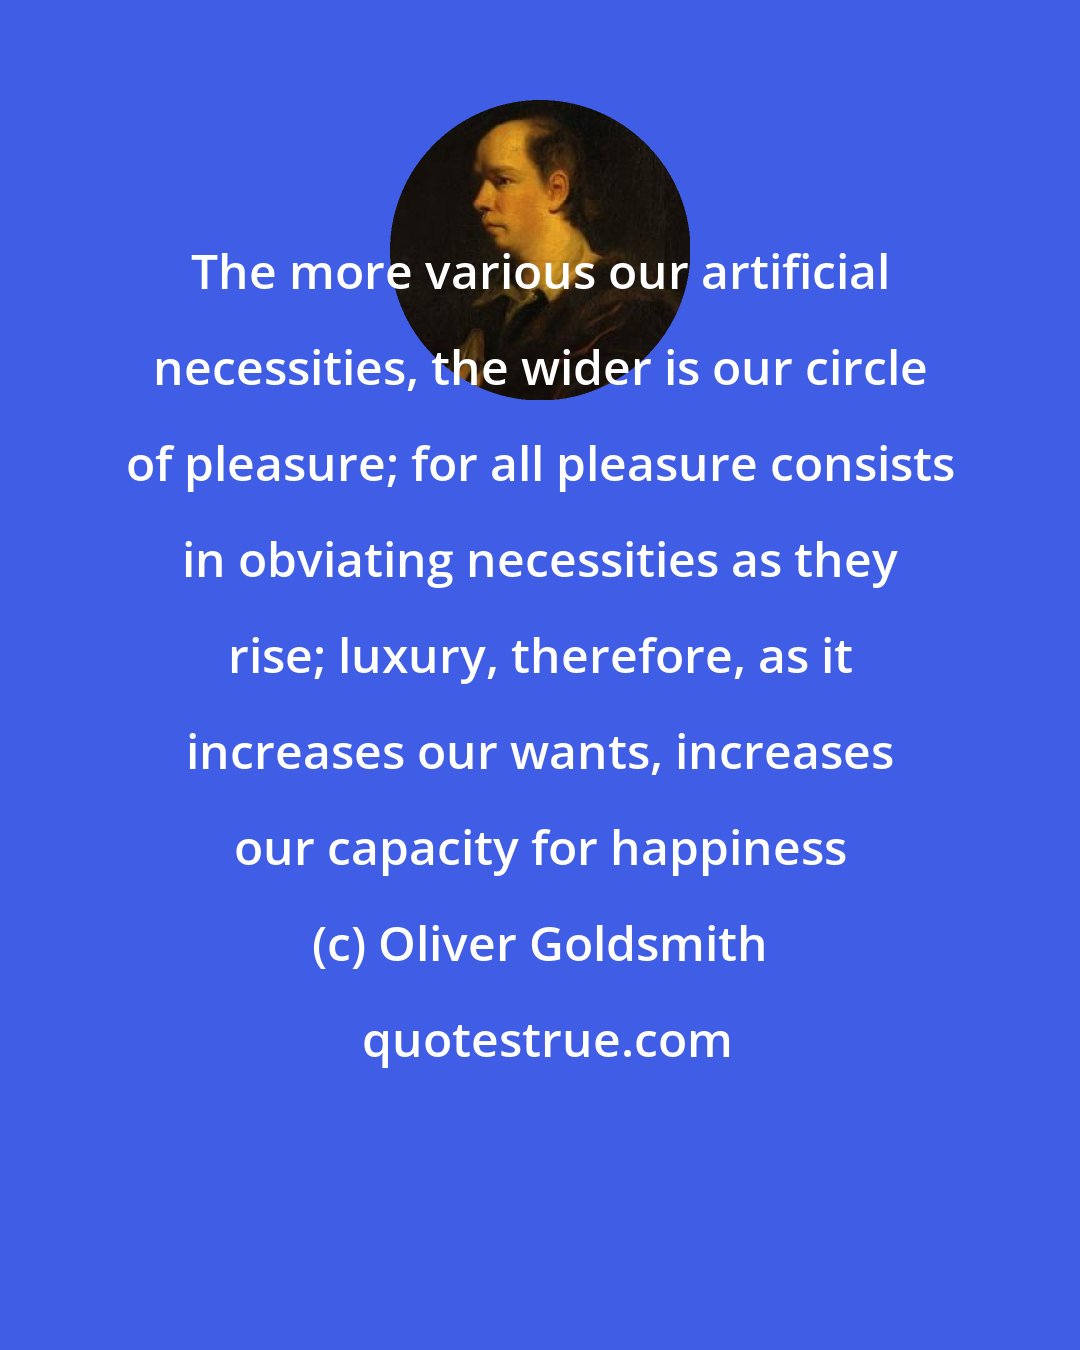 Oliver Goldsmith: The more various our artificial necessities, the wider is our circle of pleasure; for all pleasure consists in obviating necessities as they rise; luxury, therefore, as it increases our wants, increases our capacity for happiness